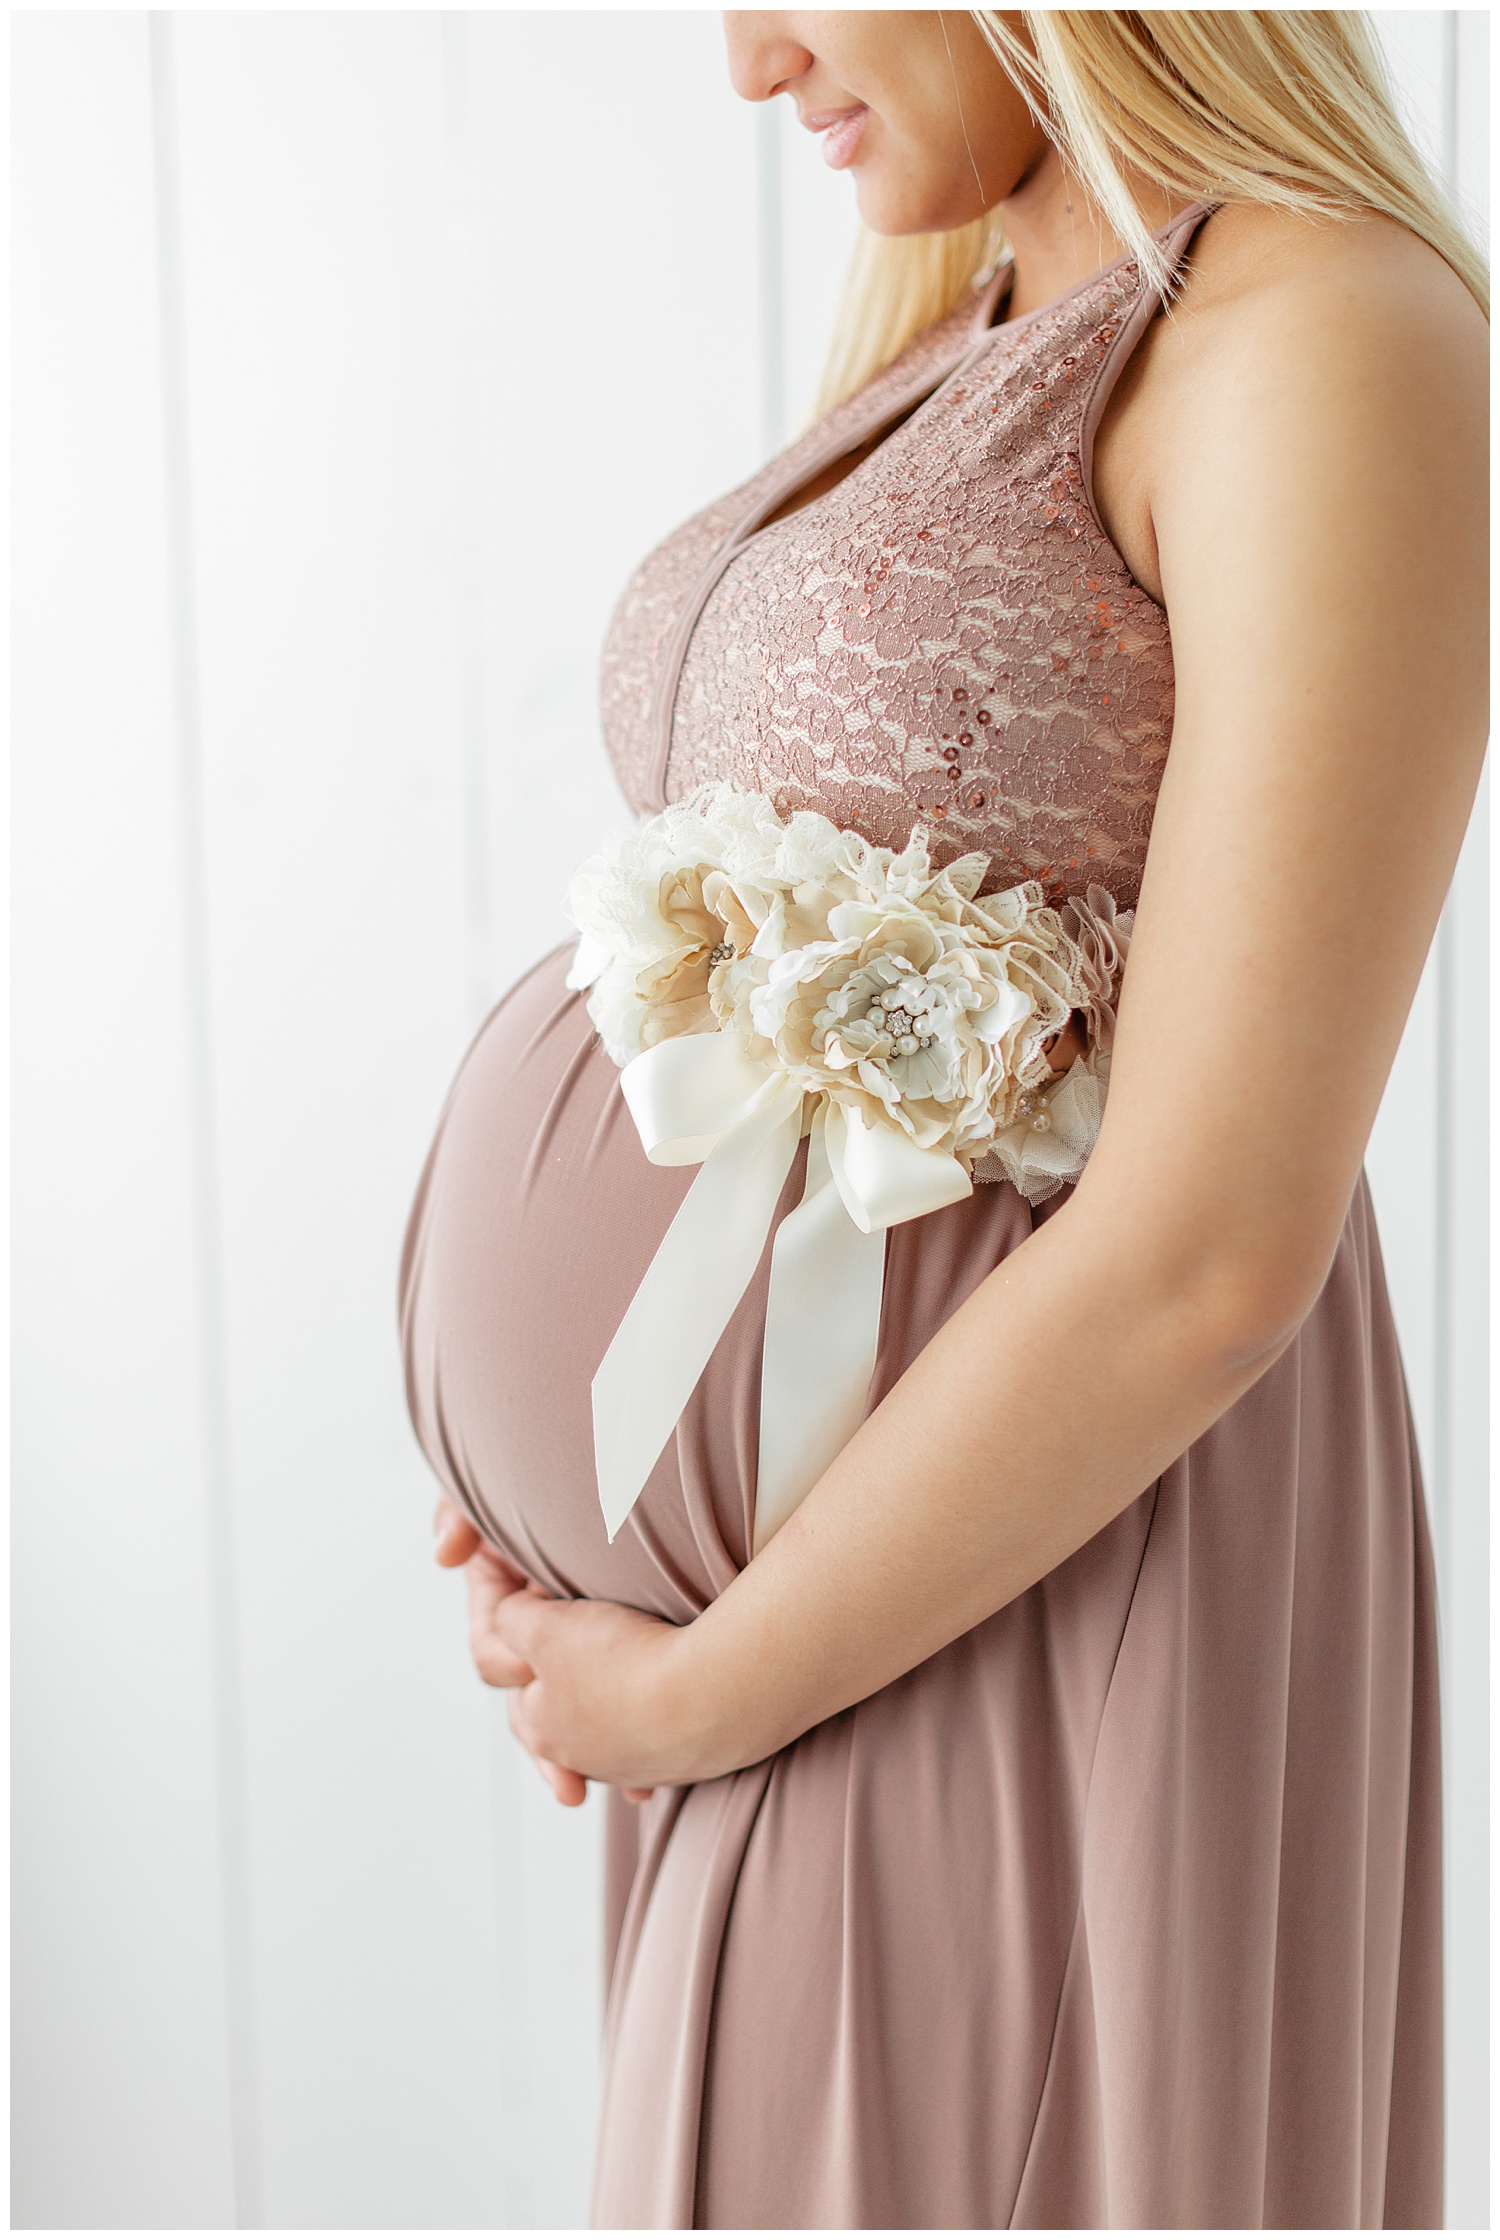 Karen patiently waits for the arrival of her baby girl while while hugging her belly adorn with a cream floral sash wearing a blush maxi dress | CB Studio